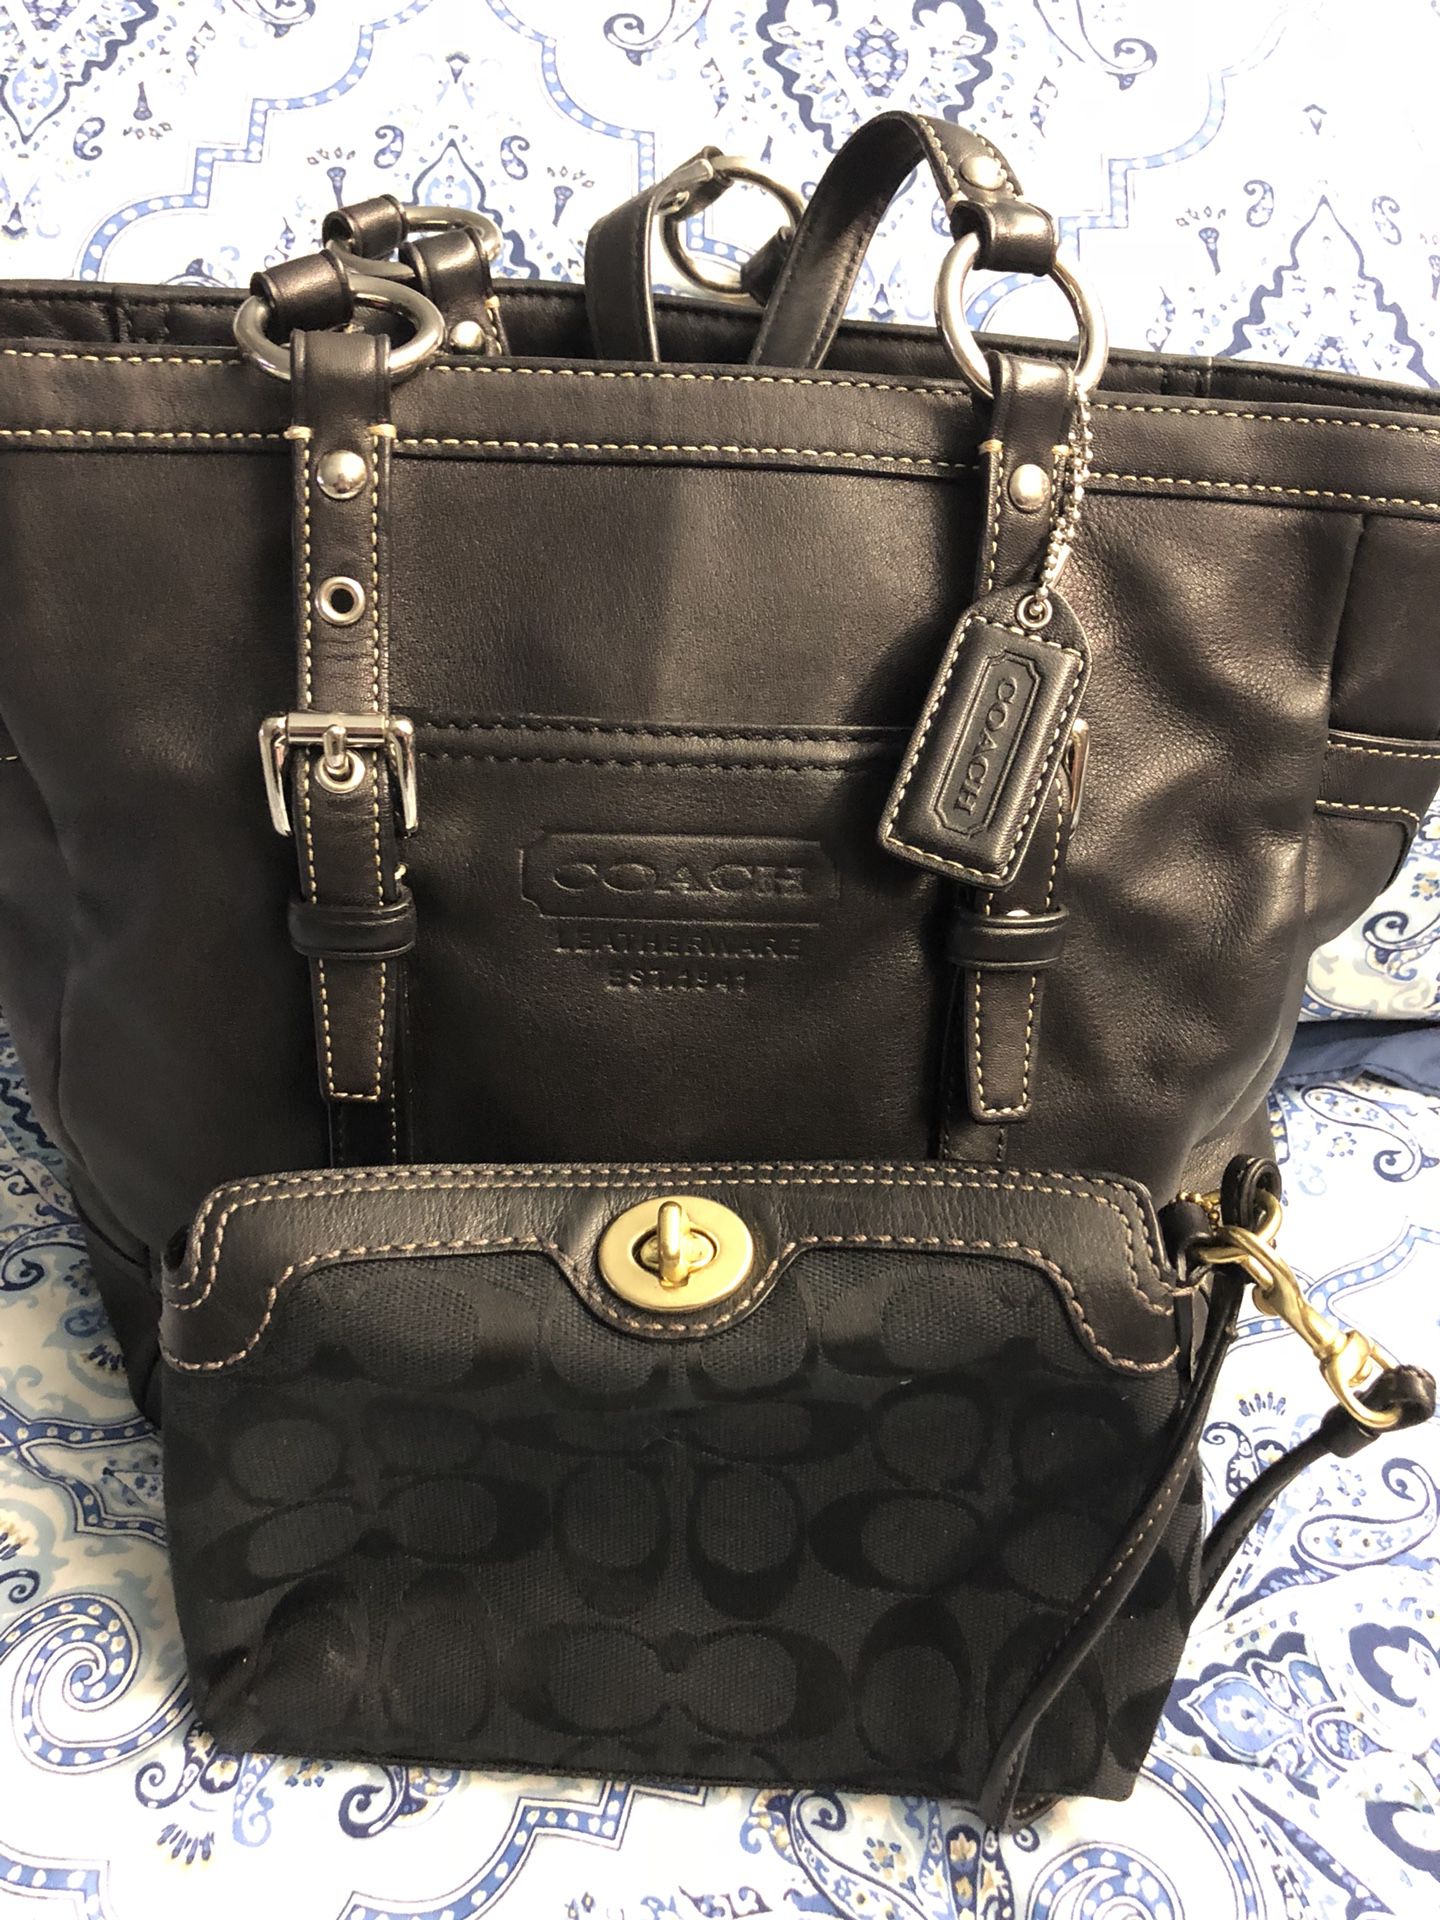 Gorgeous classic coach shoulder bags with free wristlet